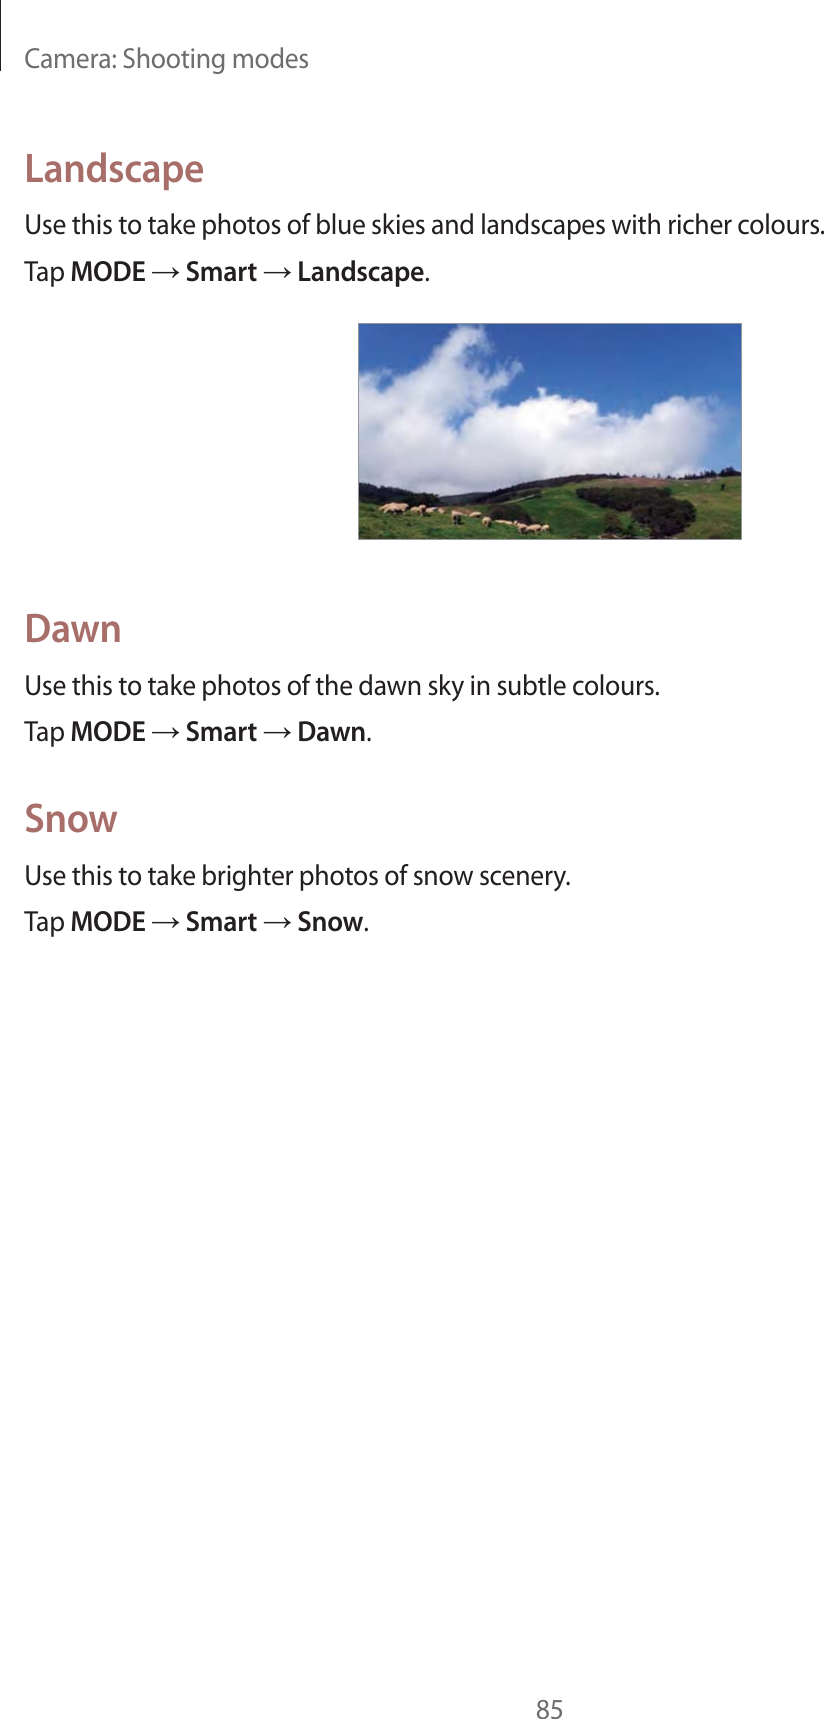 Camera: Shooting modes85LandscapeUse this to take photos of blue skies and landscapes with richer colours.Tap MODE  Smart  Landscape.DawnUse this to take photos of the dawn sky in subtle colours.Tap MODE  Smart  Dawn.SnowUse this to take brighter photos of snow scenery.Tap MODE  Smart  Snow.